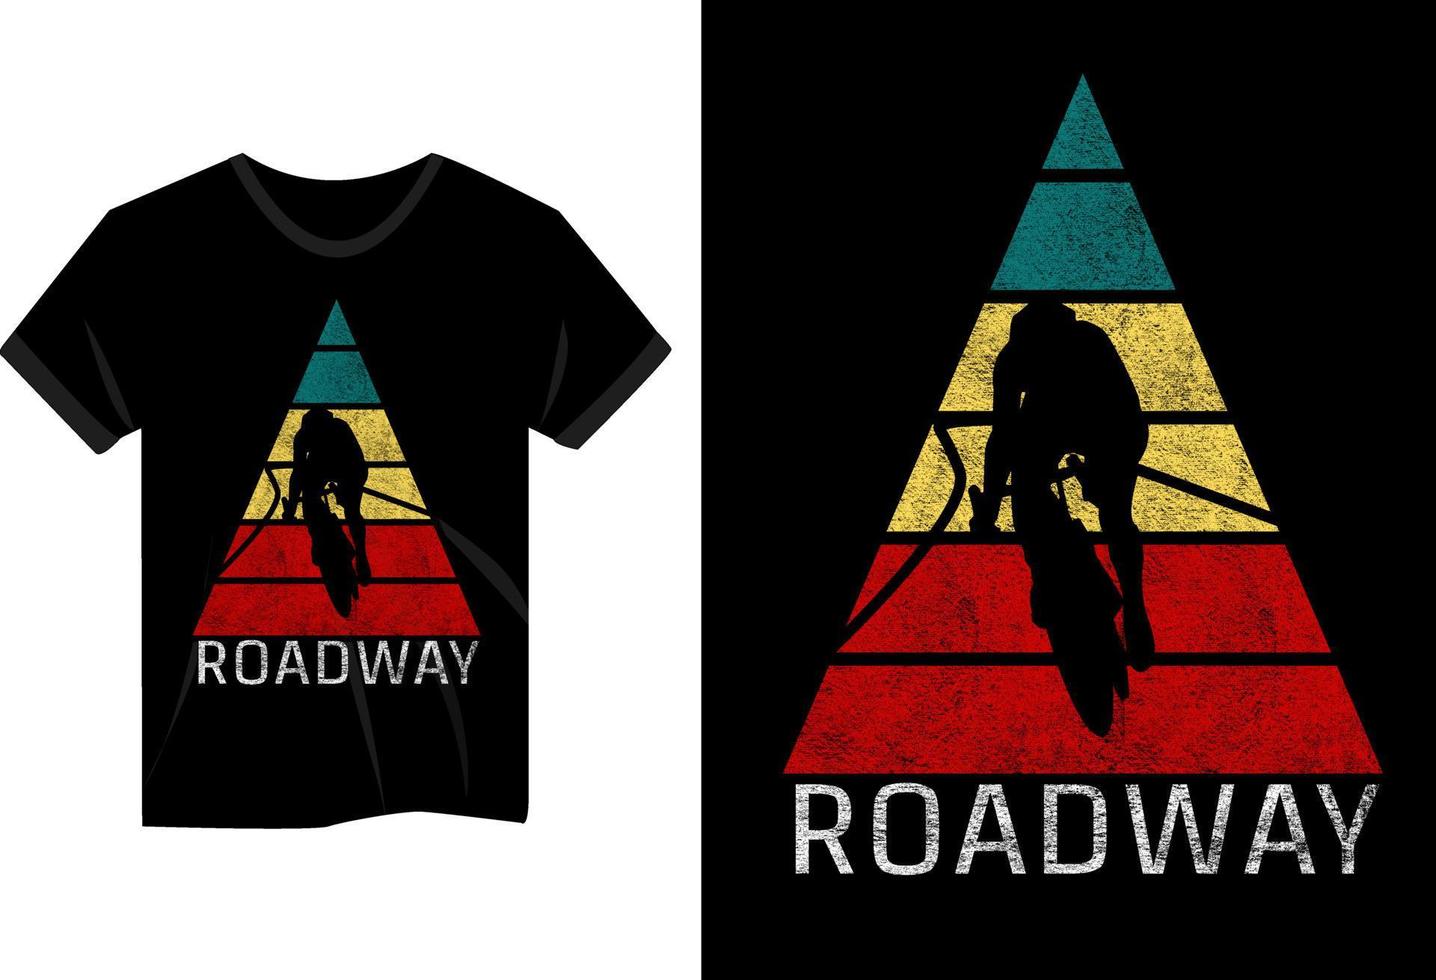 Roadway bicycle silhouette vintage t shirt design vector